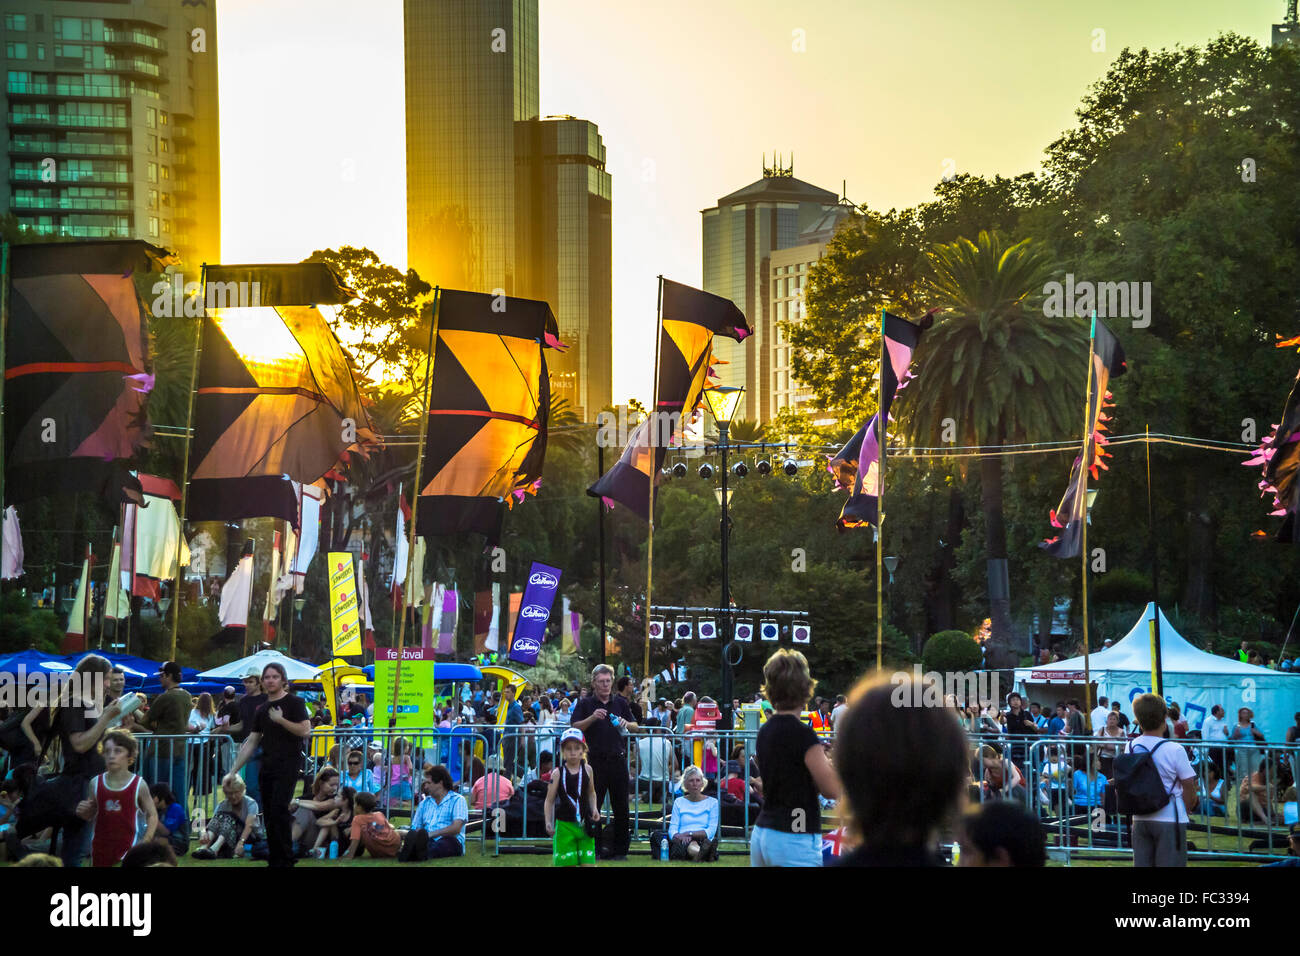 Crowds gathered in Alexandra Gardens at Melbourne Festival flags waving in the sunset Stock Photo